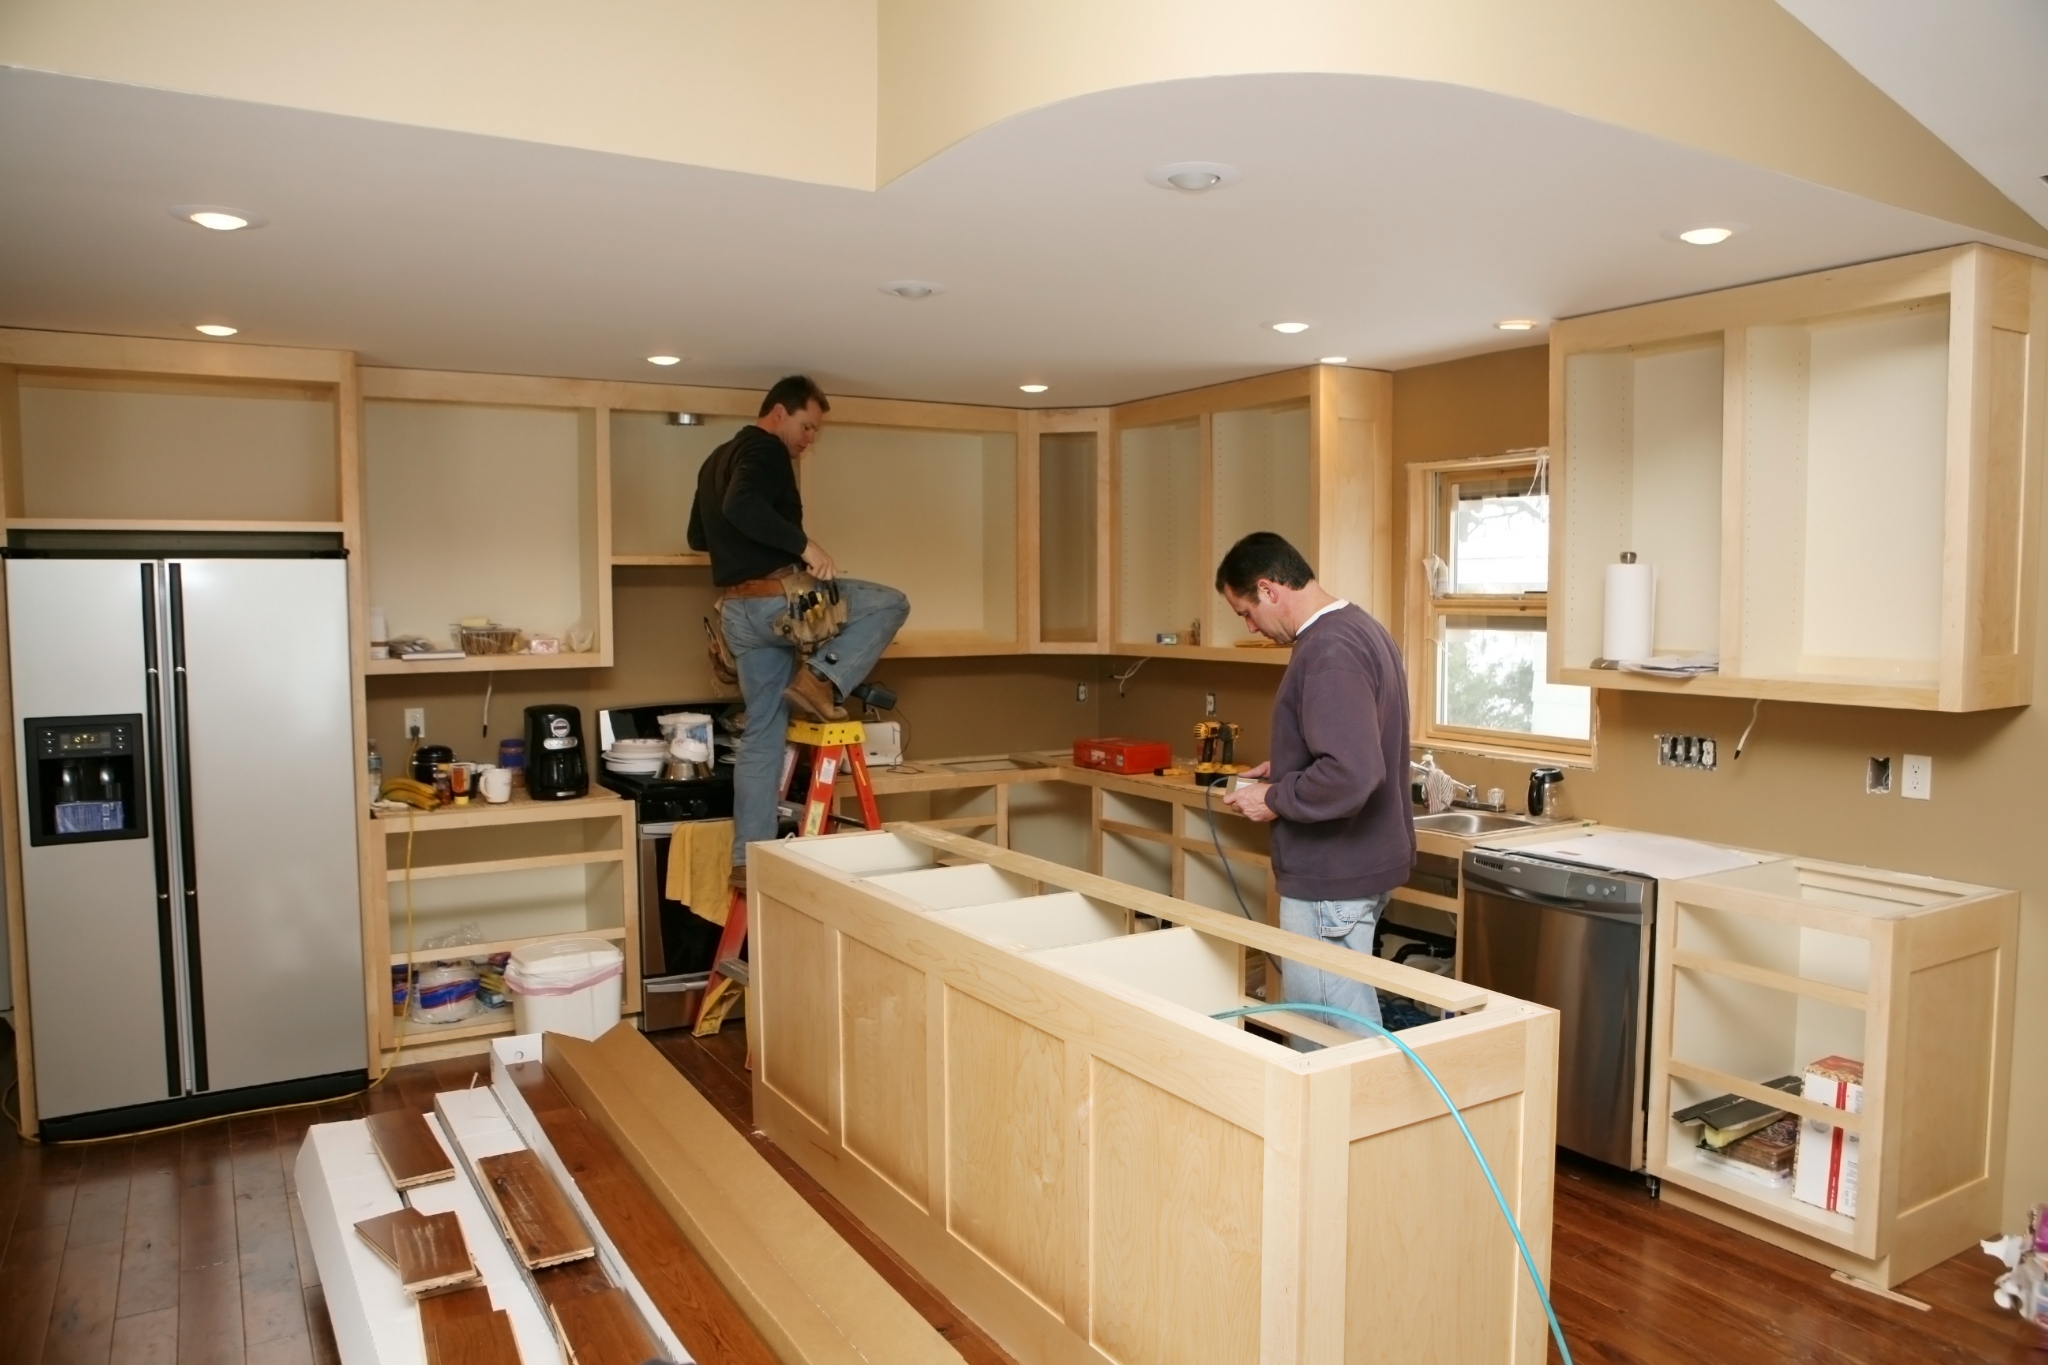 Remodeling Your Kitchen? Read This! - This Old House